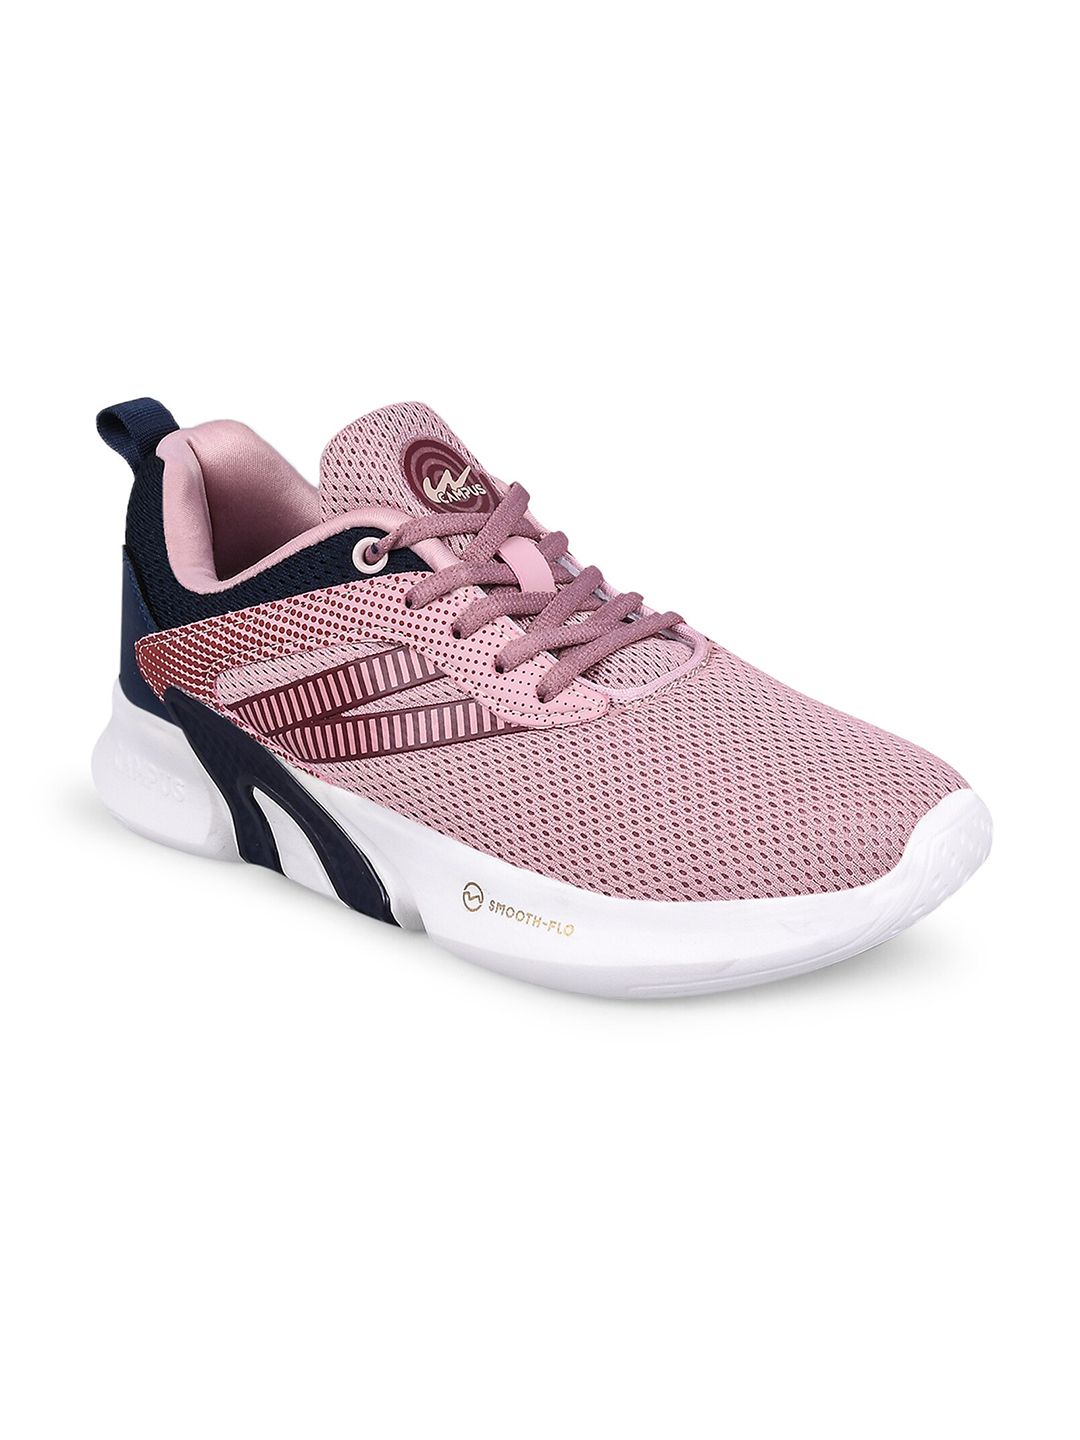 Campus Women Mesh CAMP-RUBY Running Shoes Price in India